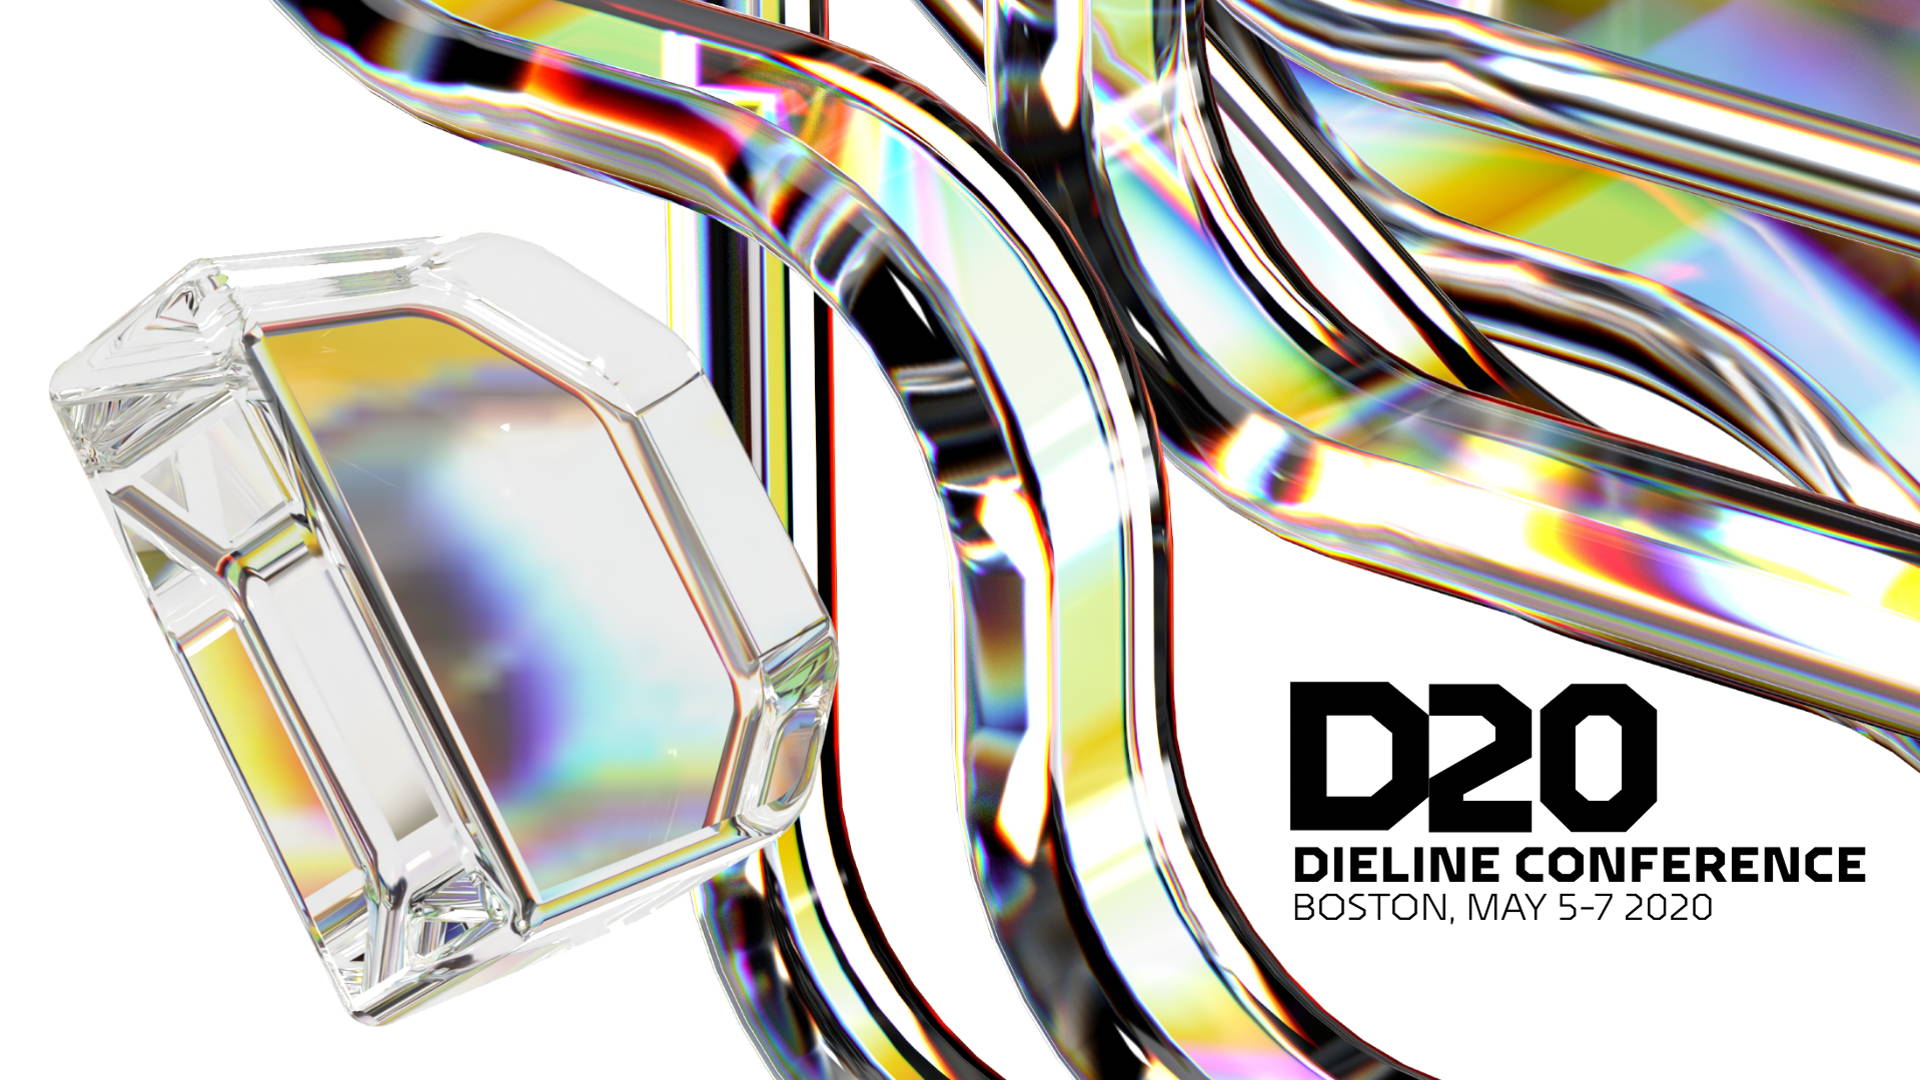 Featured image for Advanced Pricing For Dieline Conference 2020 Ends Tomorrow 1/31